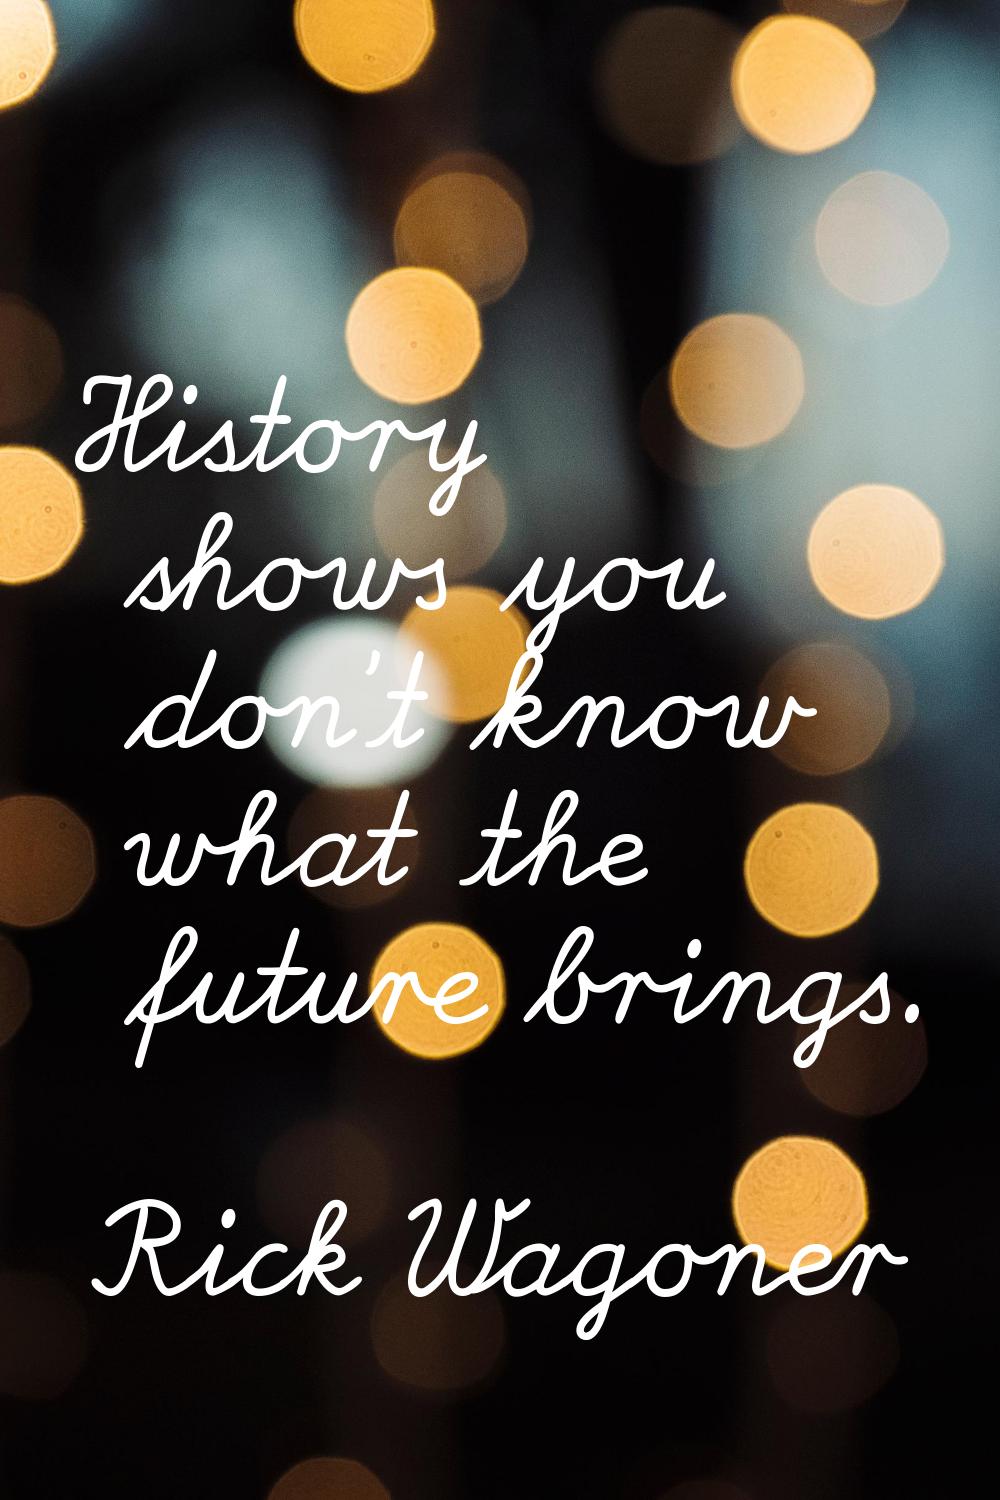 History shows you don't know what the future brings.